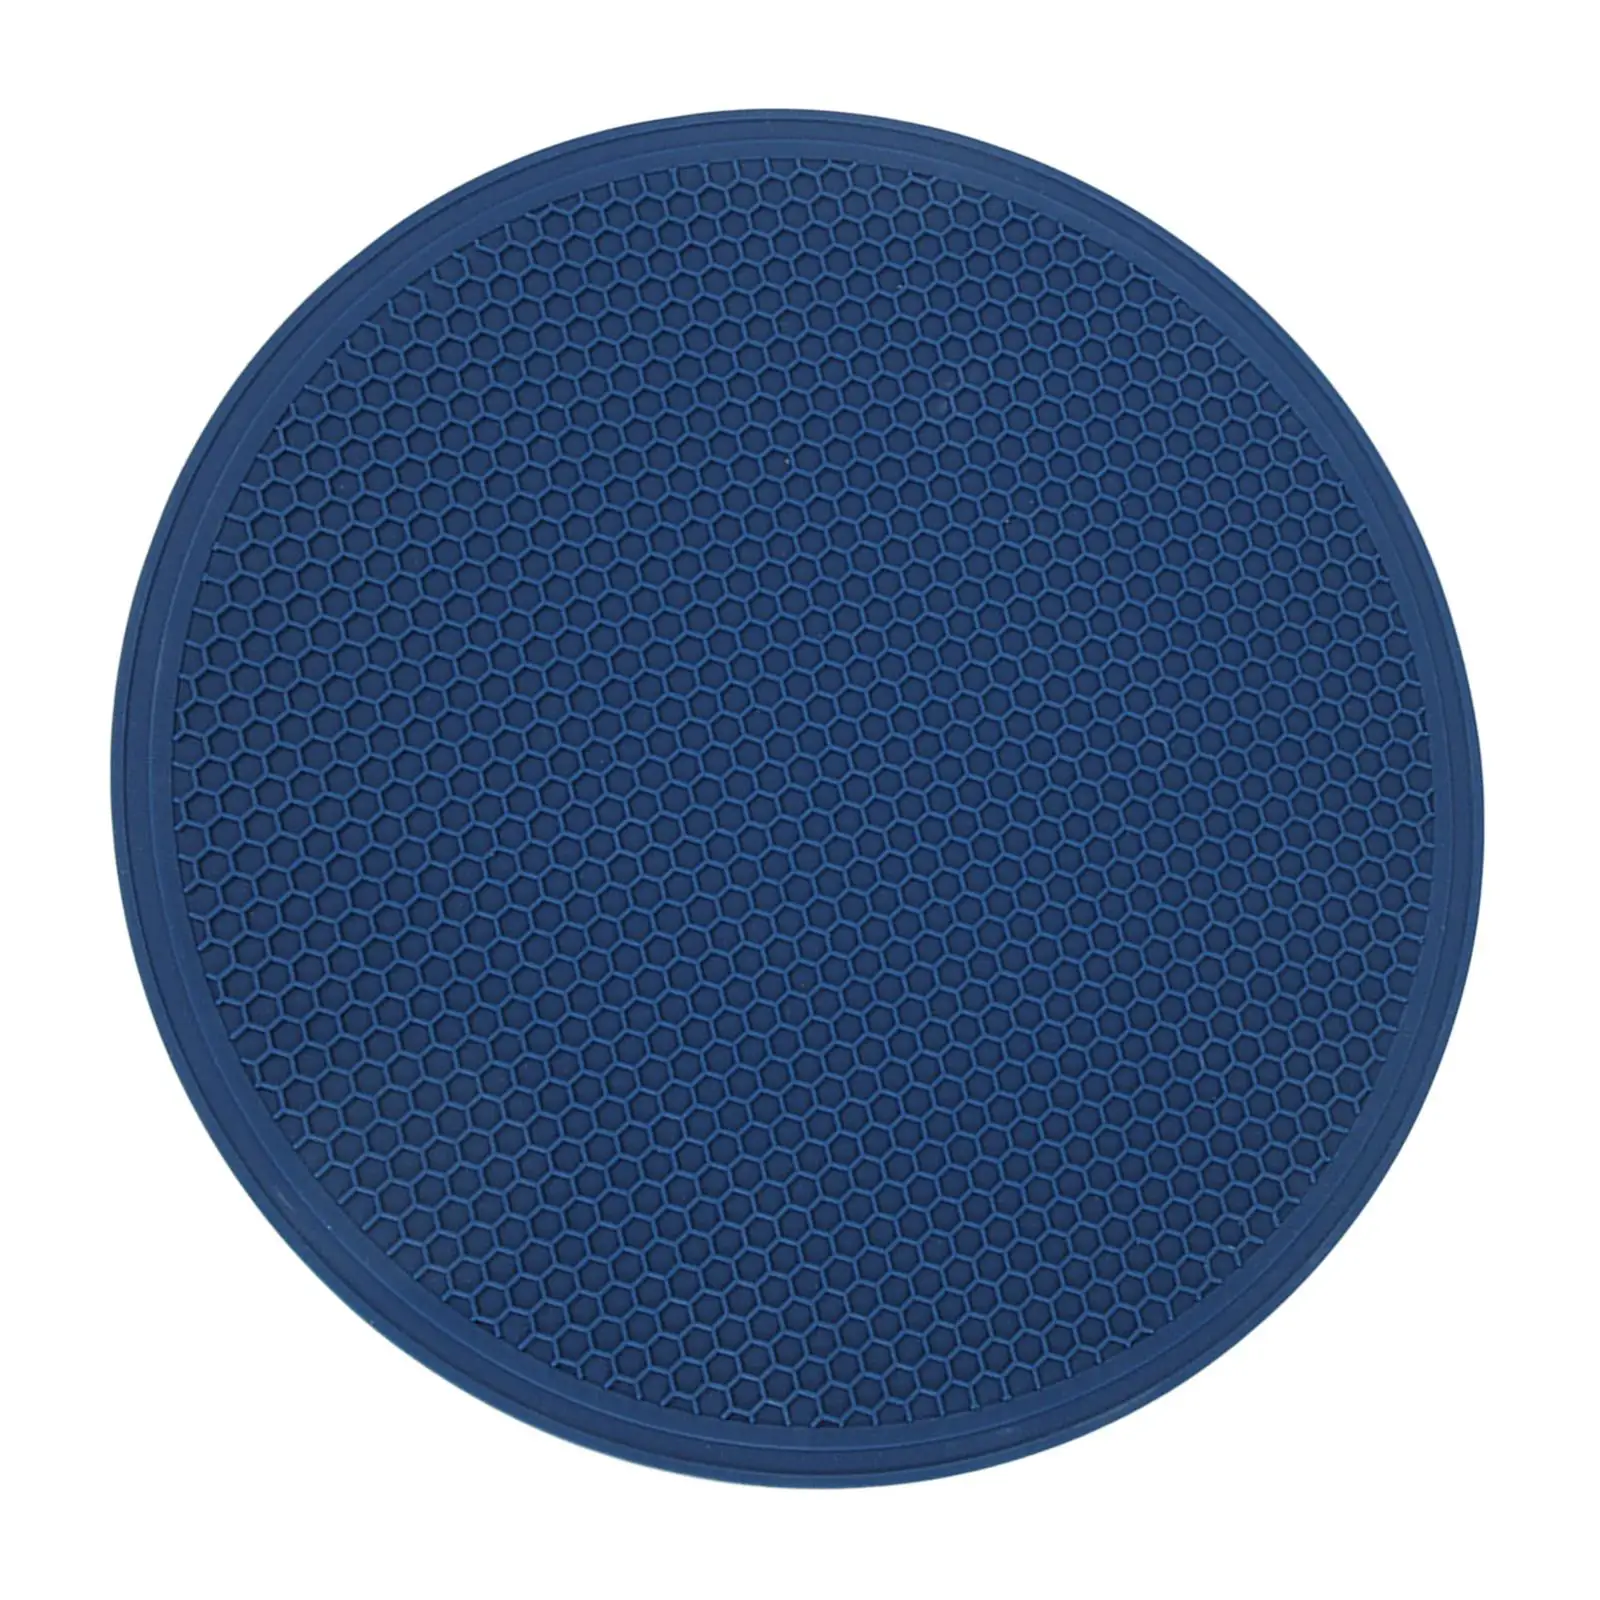 Heat Resistant Oven Mat Round Pot Holder Large Soft Place Mat 30cm Counter Drying Placemat for Bowls Dishes Plates